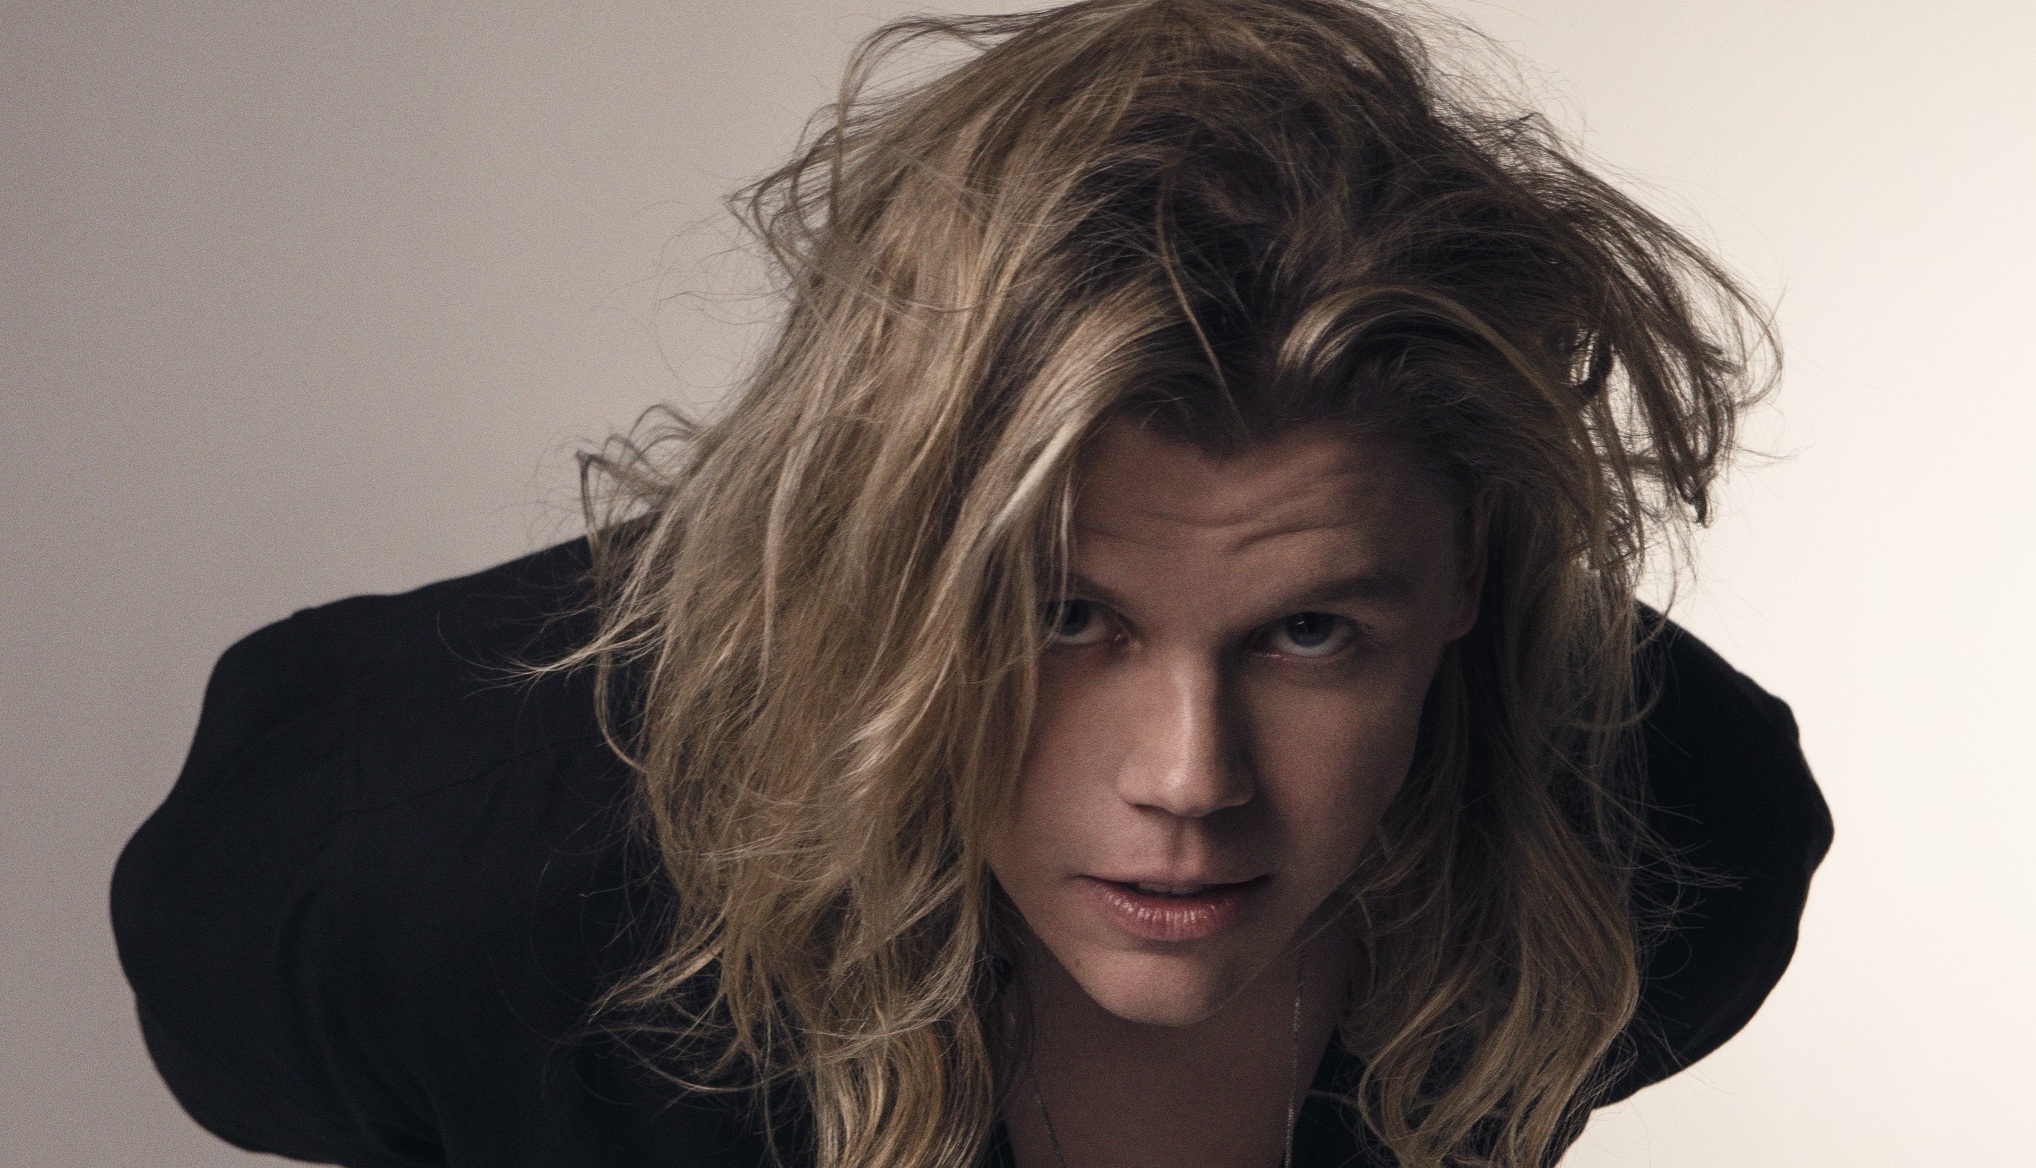 Conrad Sewell signs to Sony Music Entertainment